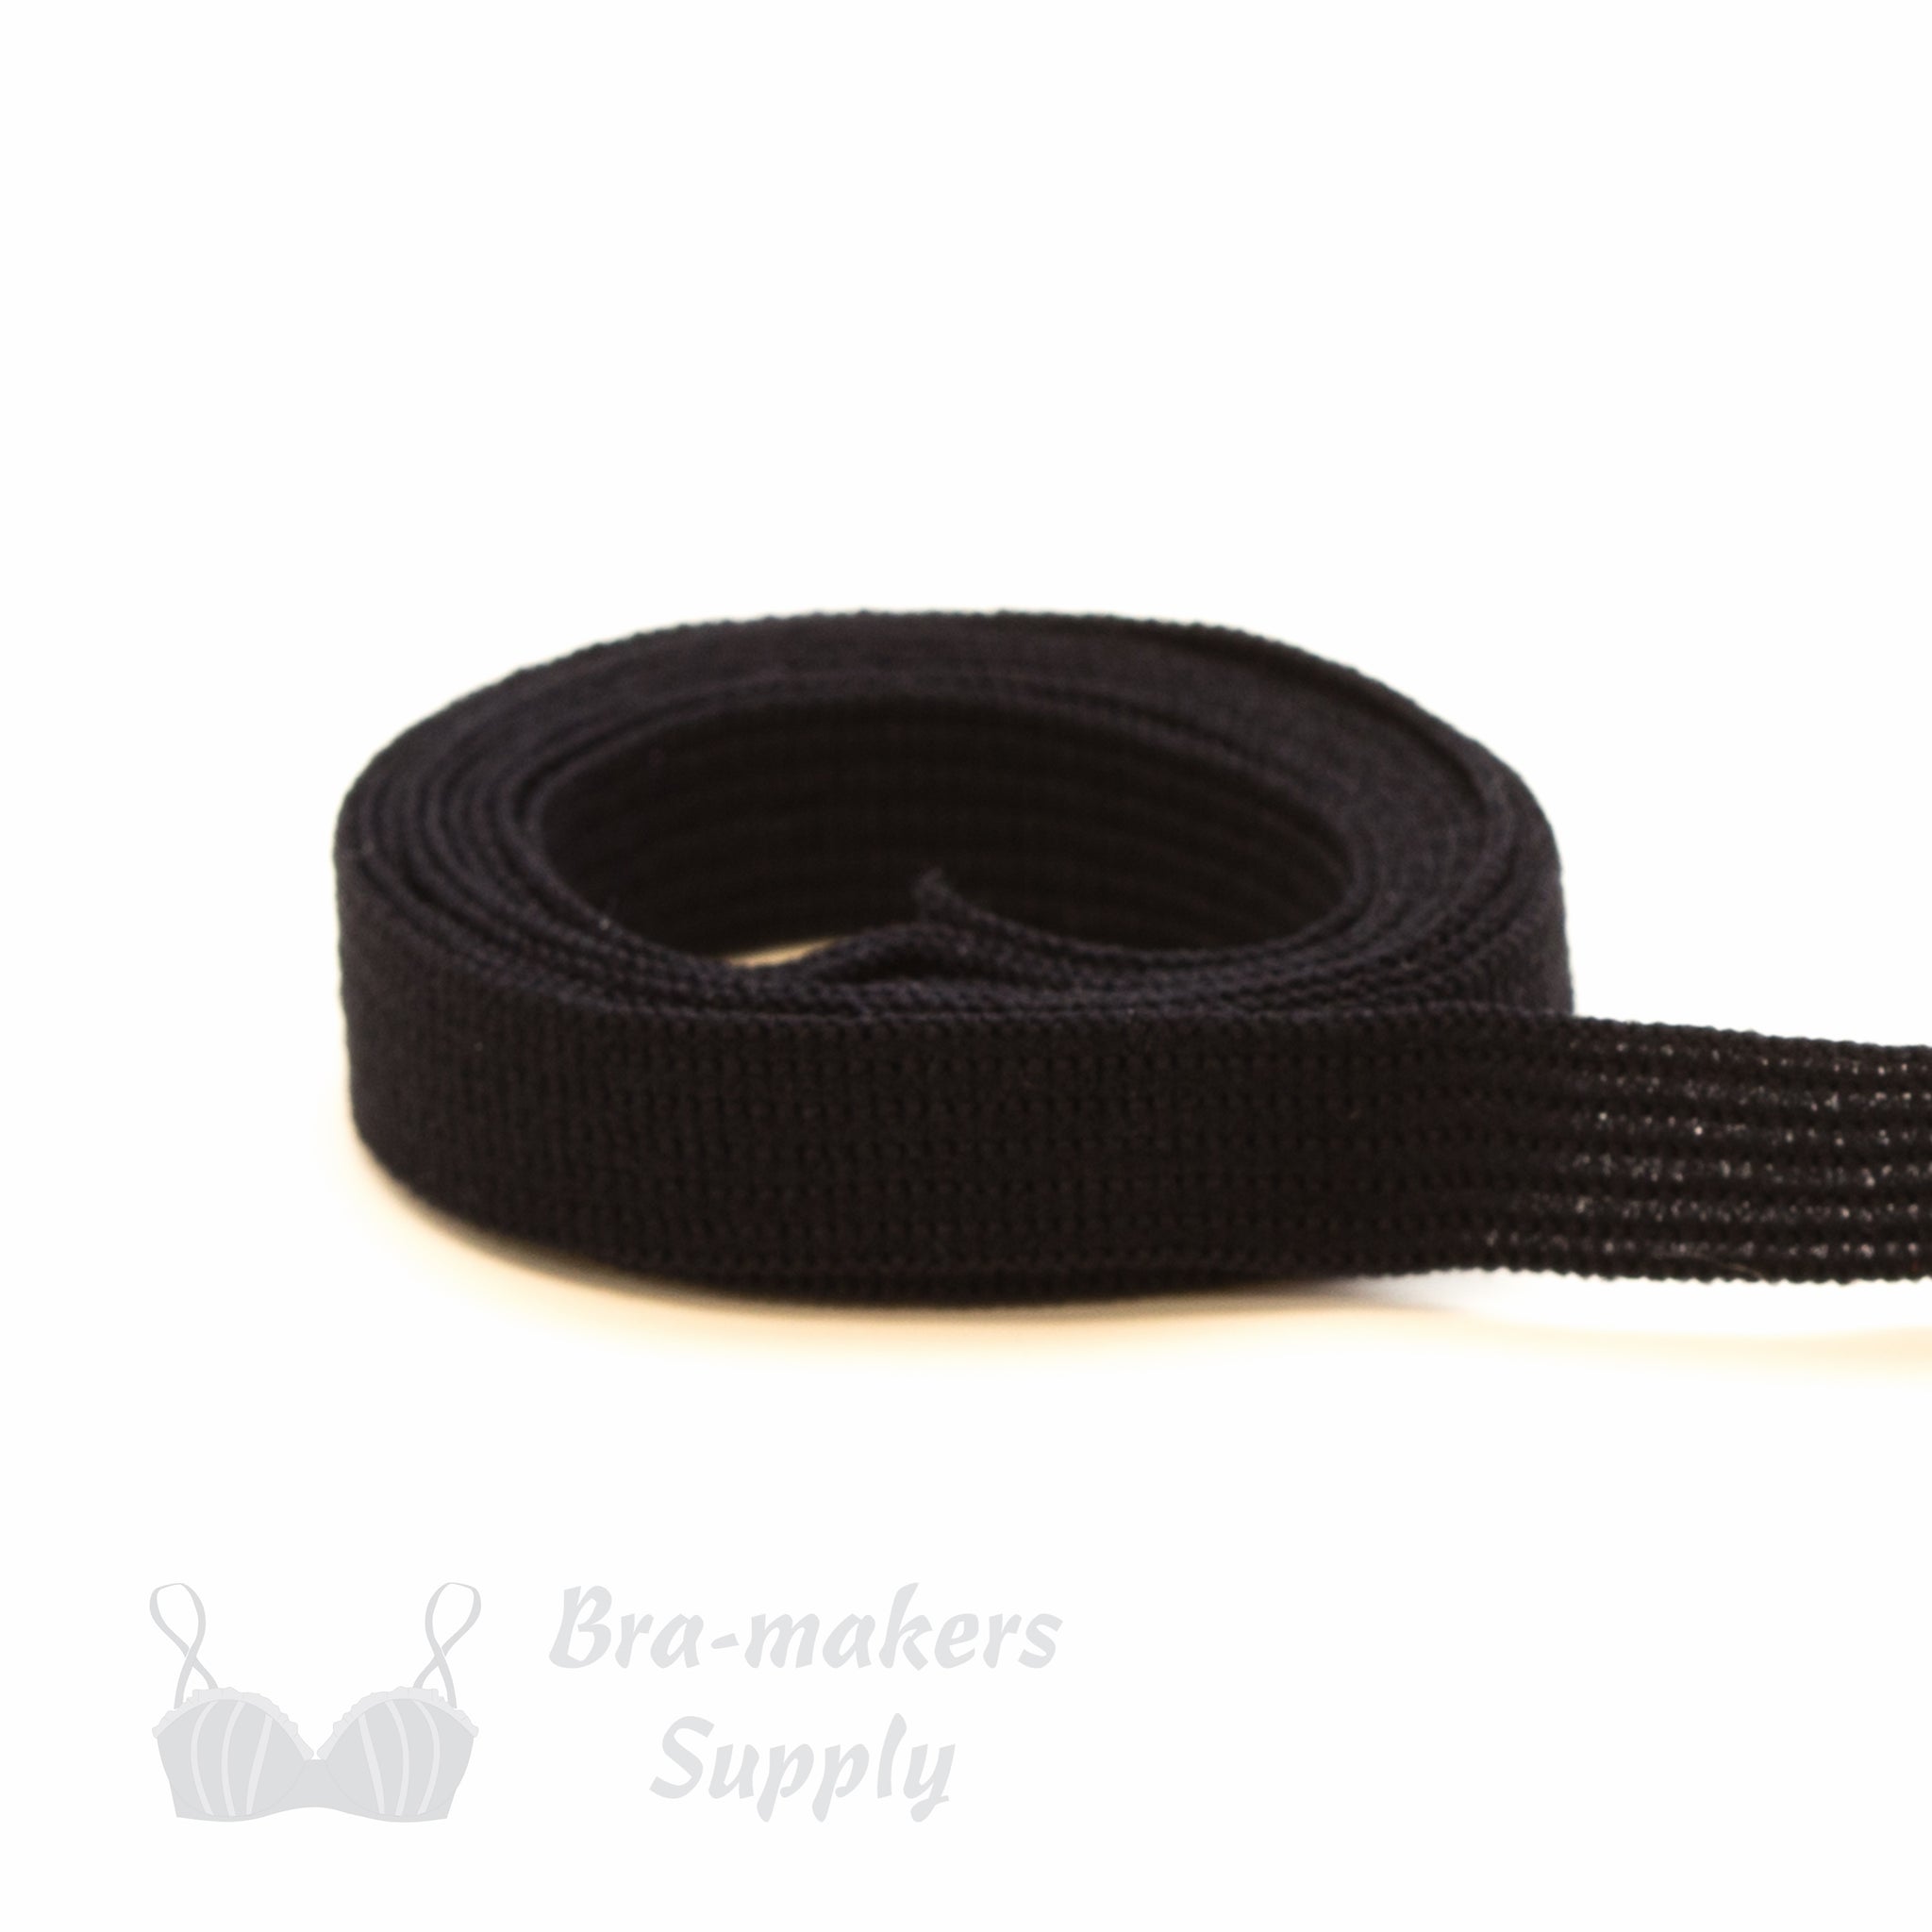 Single Row Nylon Hook and Eye Tape - Bra-makers Supply for all bra-making  essentials